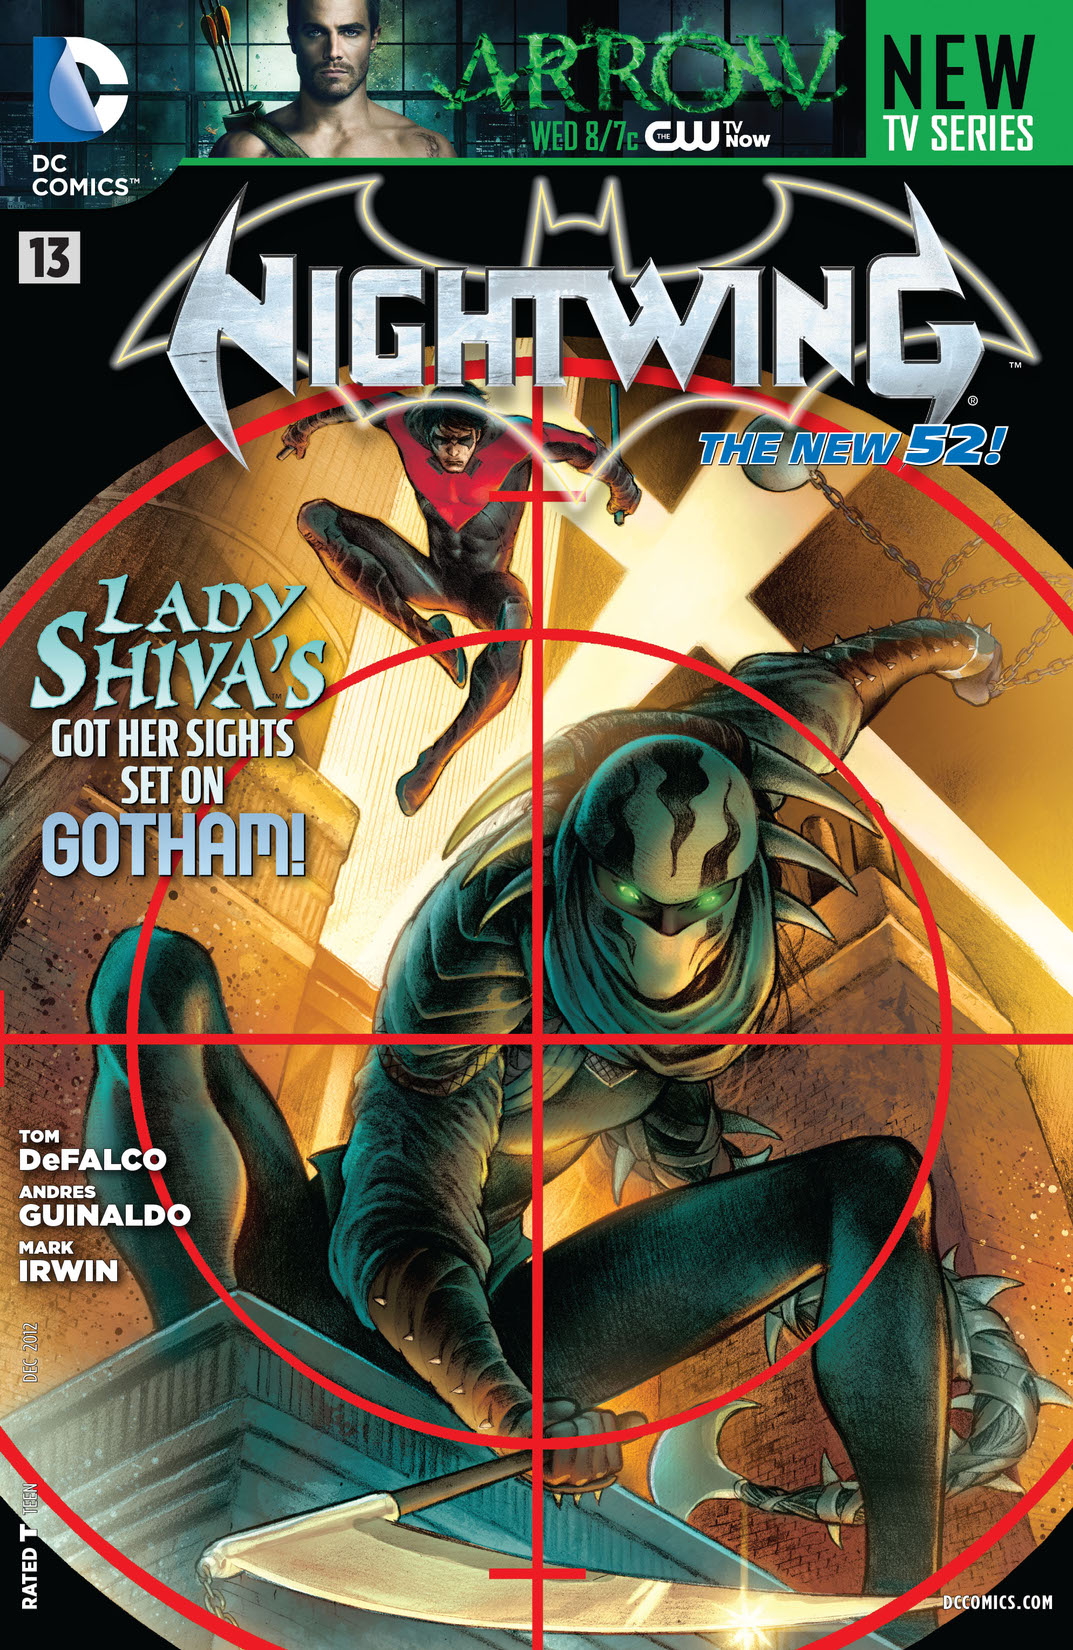 Nightwing (2011-) #13 preview images